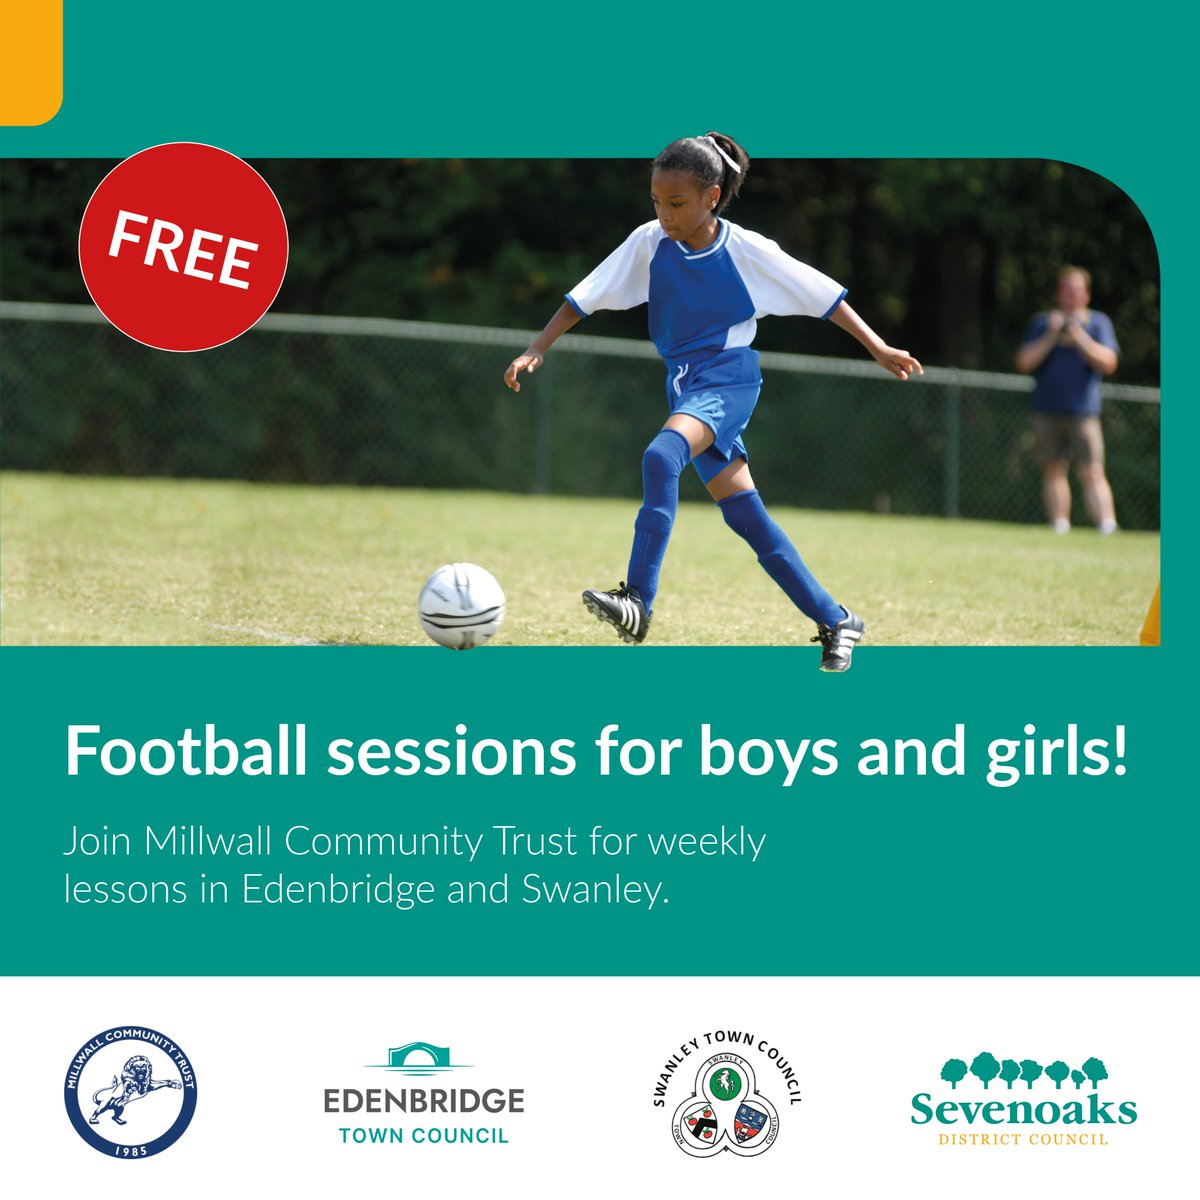 Our #free @Millwall_MCT football sessions at St Mary’s Recreation Ground in #Swanley start tomorrow! It’s open to girls & boys aged 8-16 and there is no booking required. Find out more including start & times here - sevenoaks.gov.uk/kidsfootball